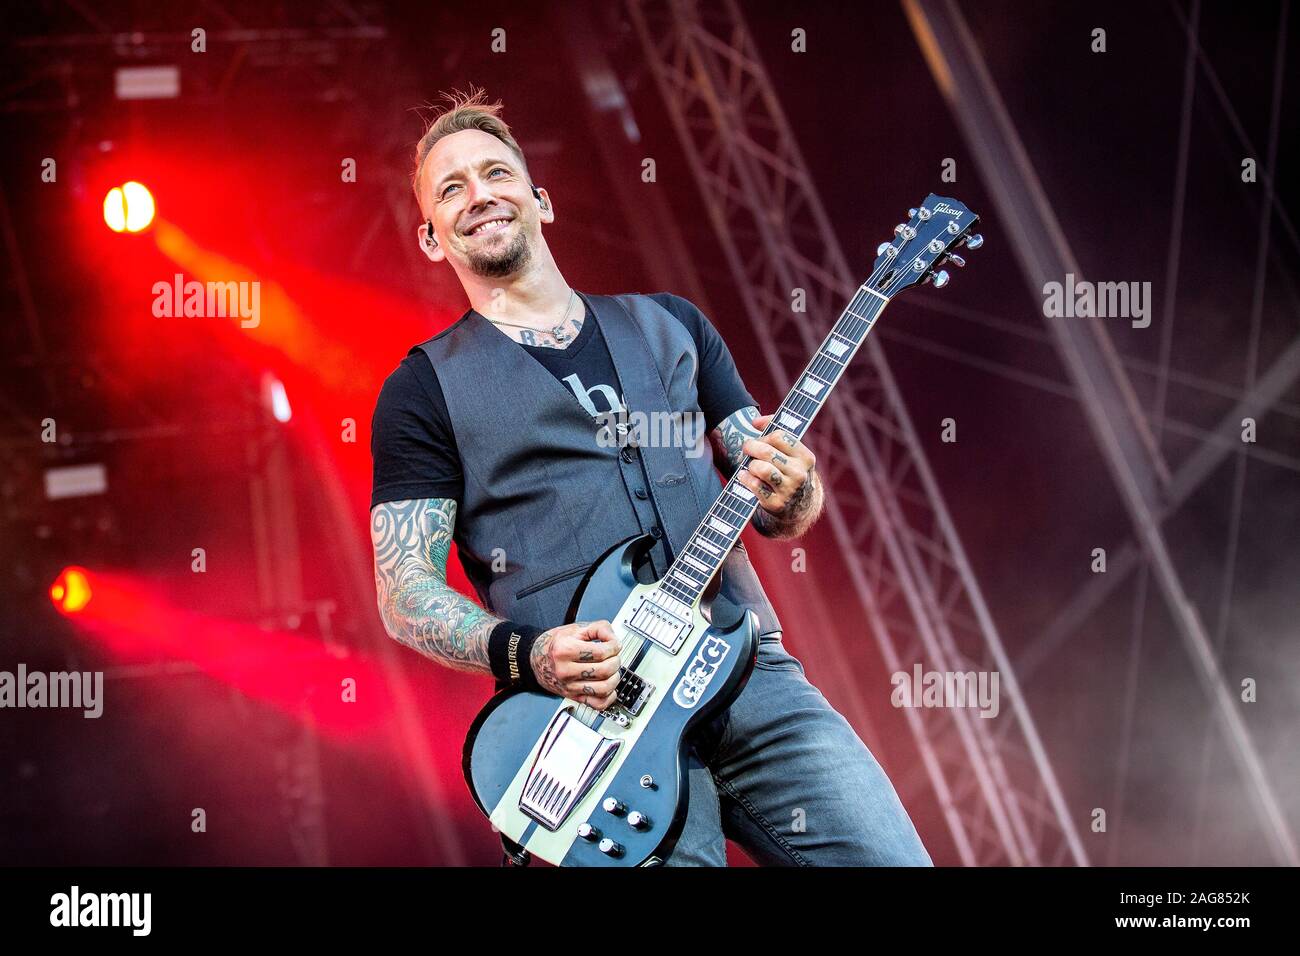 Oslo, Norway. 28th, June 2019. The Danish hard rock band Volbeat performs a live concert during the Norwegian music festival Tons of Rock 2019 in Oslo. Here vocalist and guitarist Michael Poulsen is seen live on stage. (Photo credit: Gonzales Photo - Terje Dokken). Stock Photo